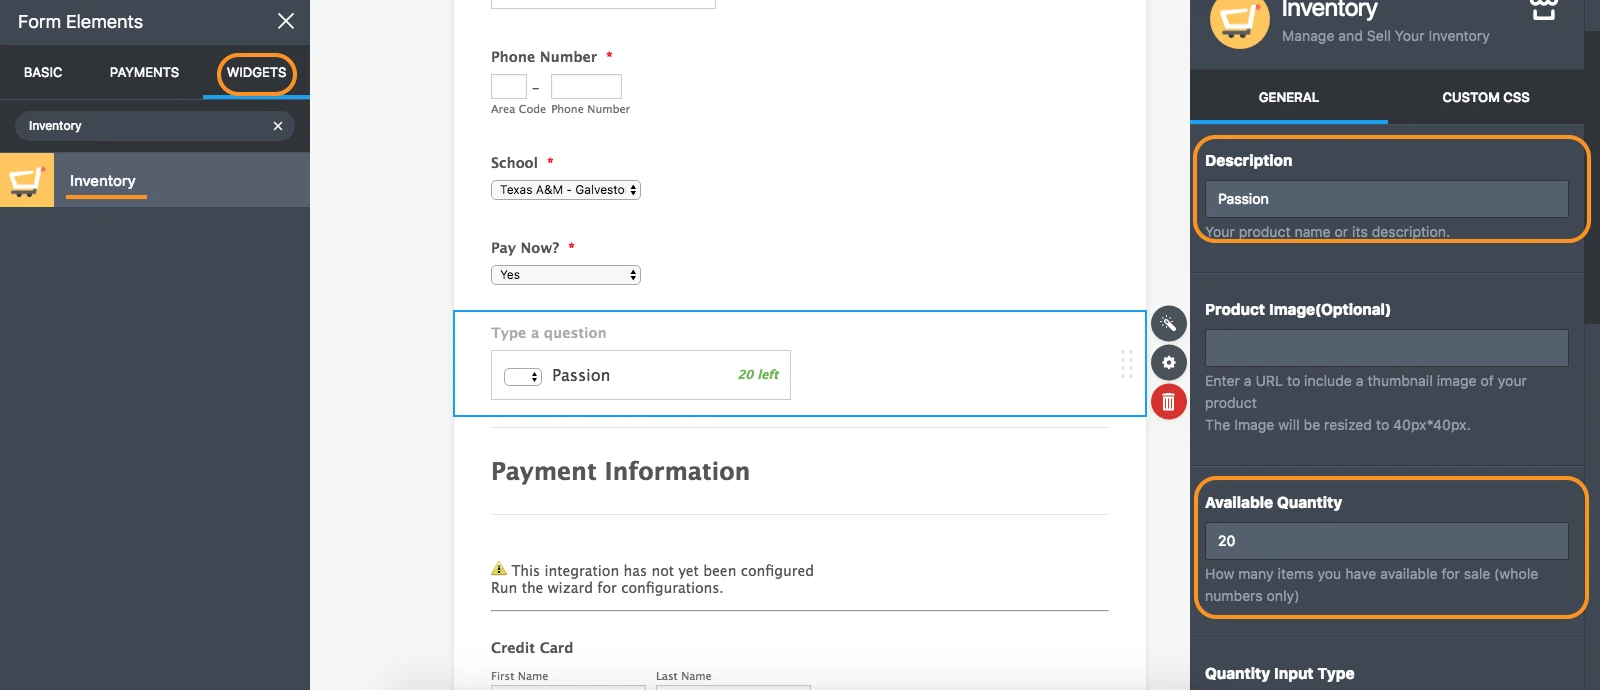 How to define an inventory to the payment integration? Image 1 Screenshot 50